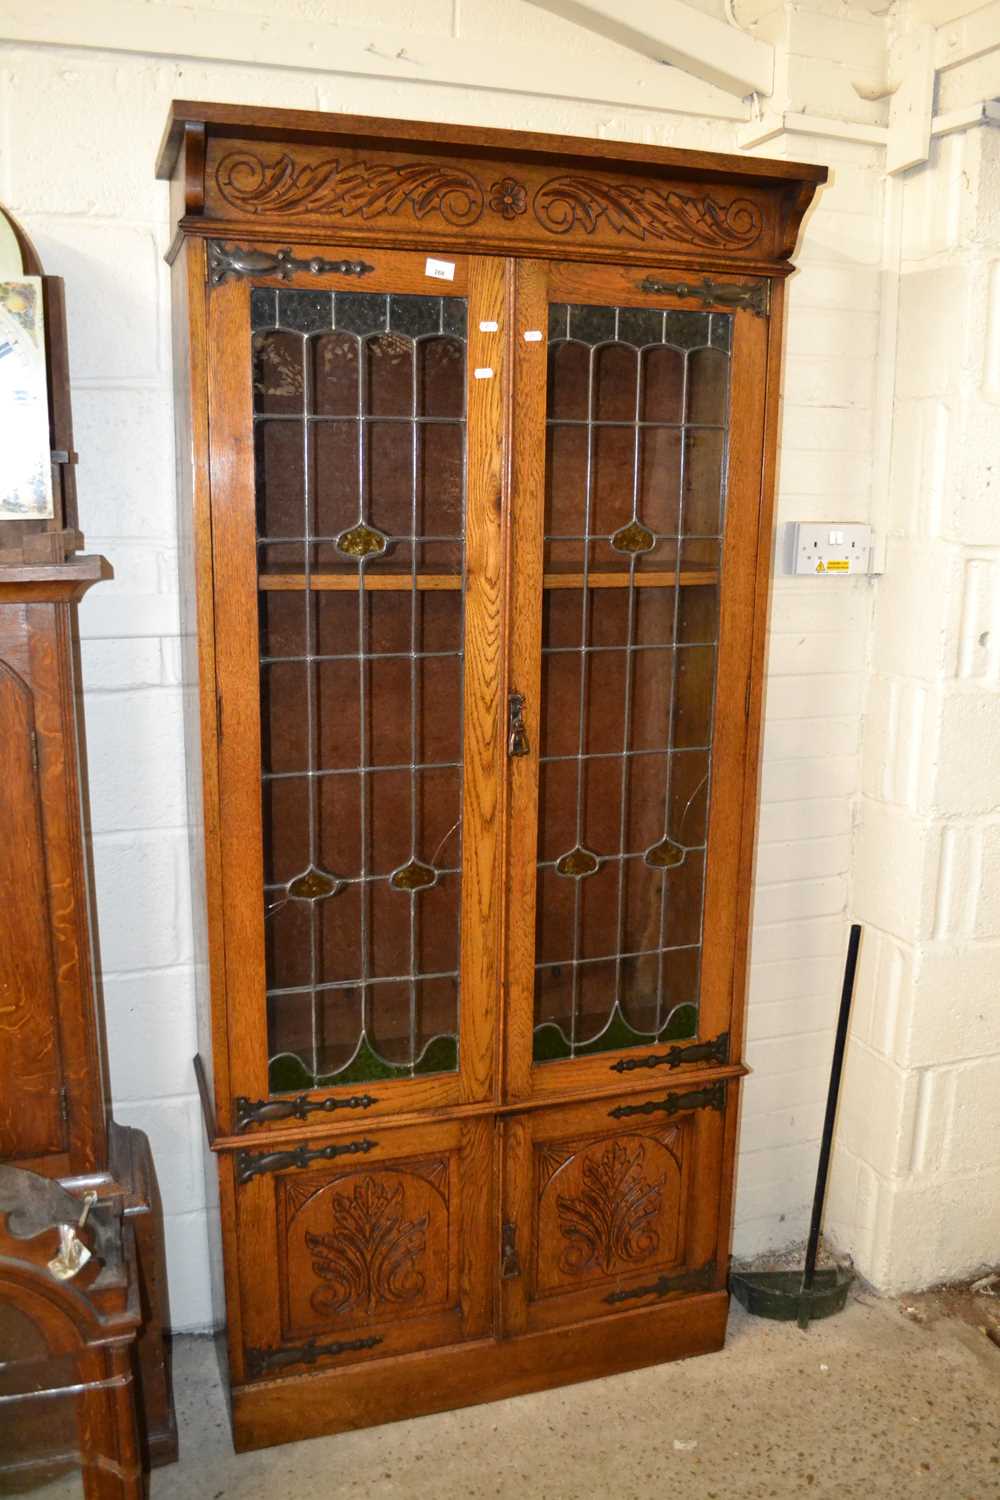 Late 19th or early 20th Century oak lead glazed bookcase cabinet in the Arts & Crafts style, the top